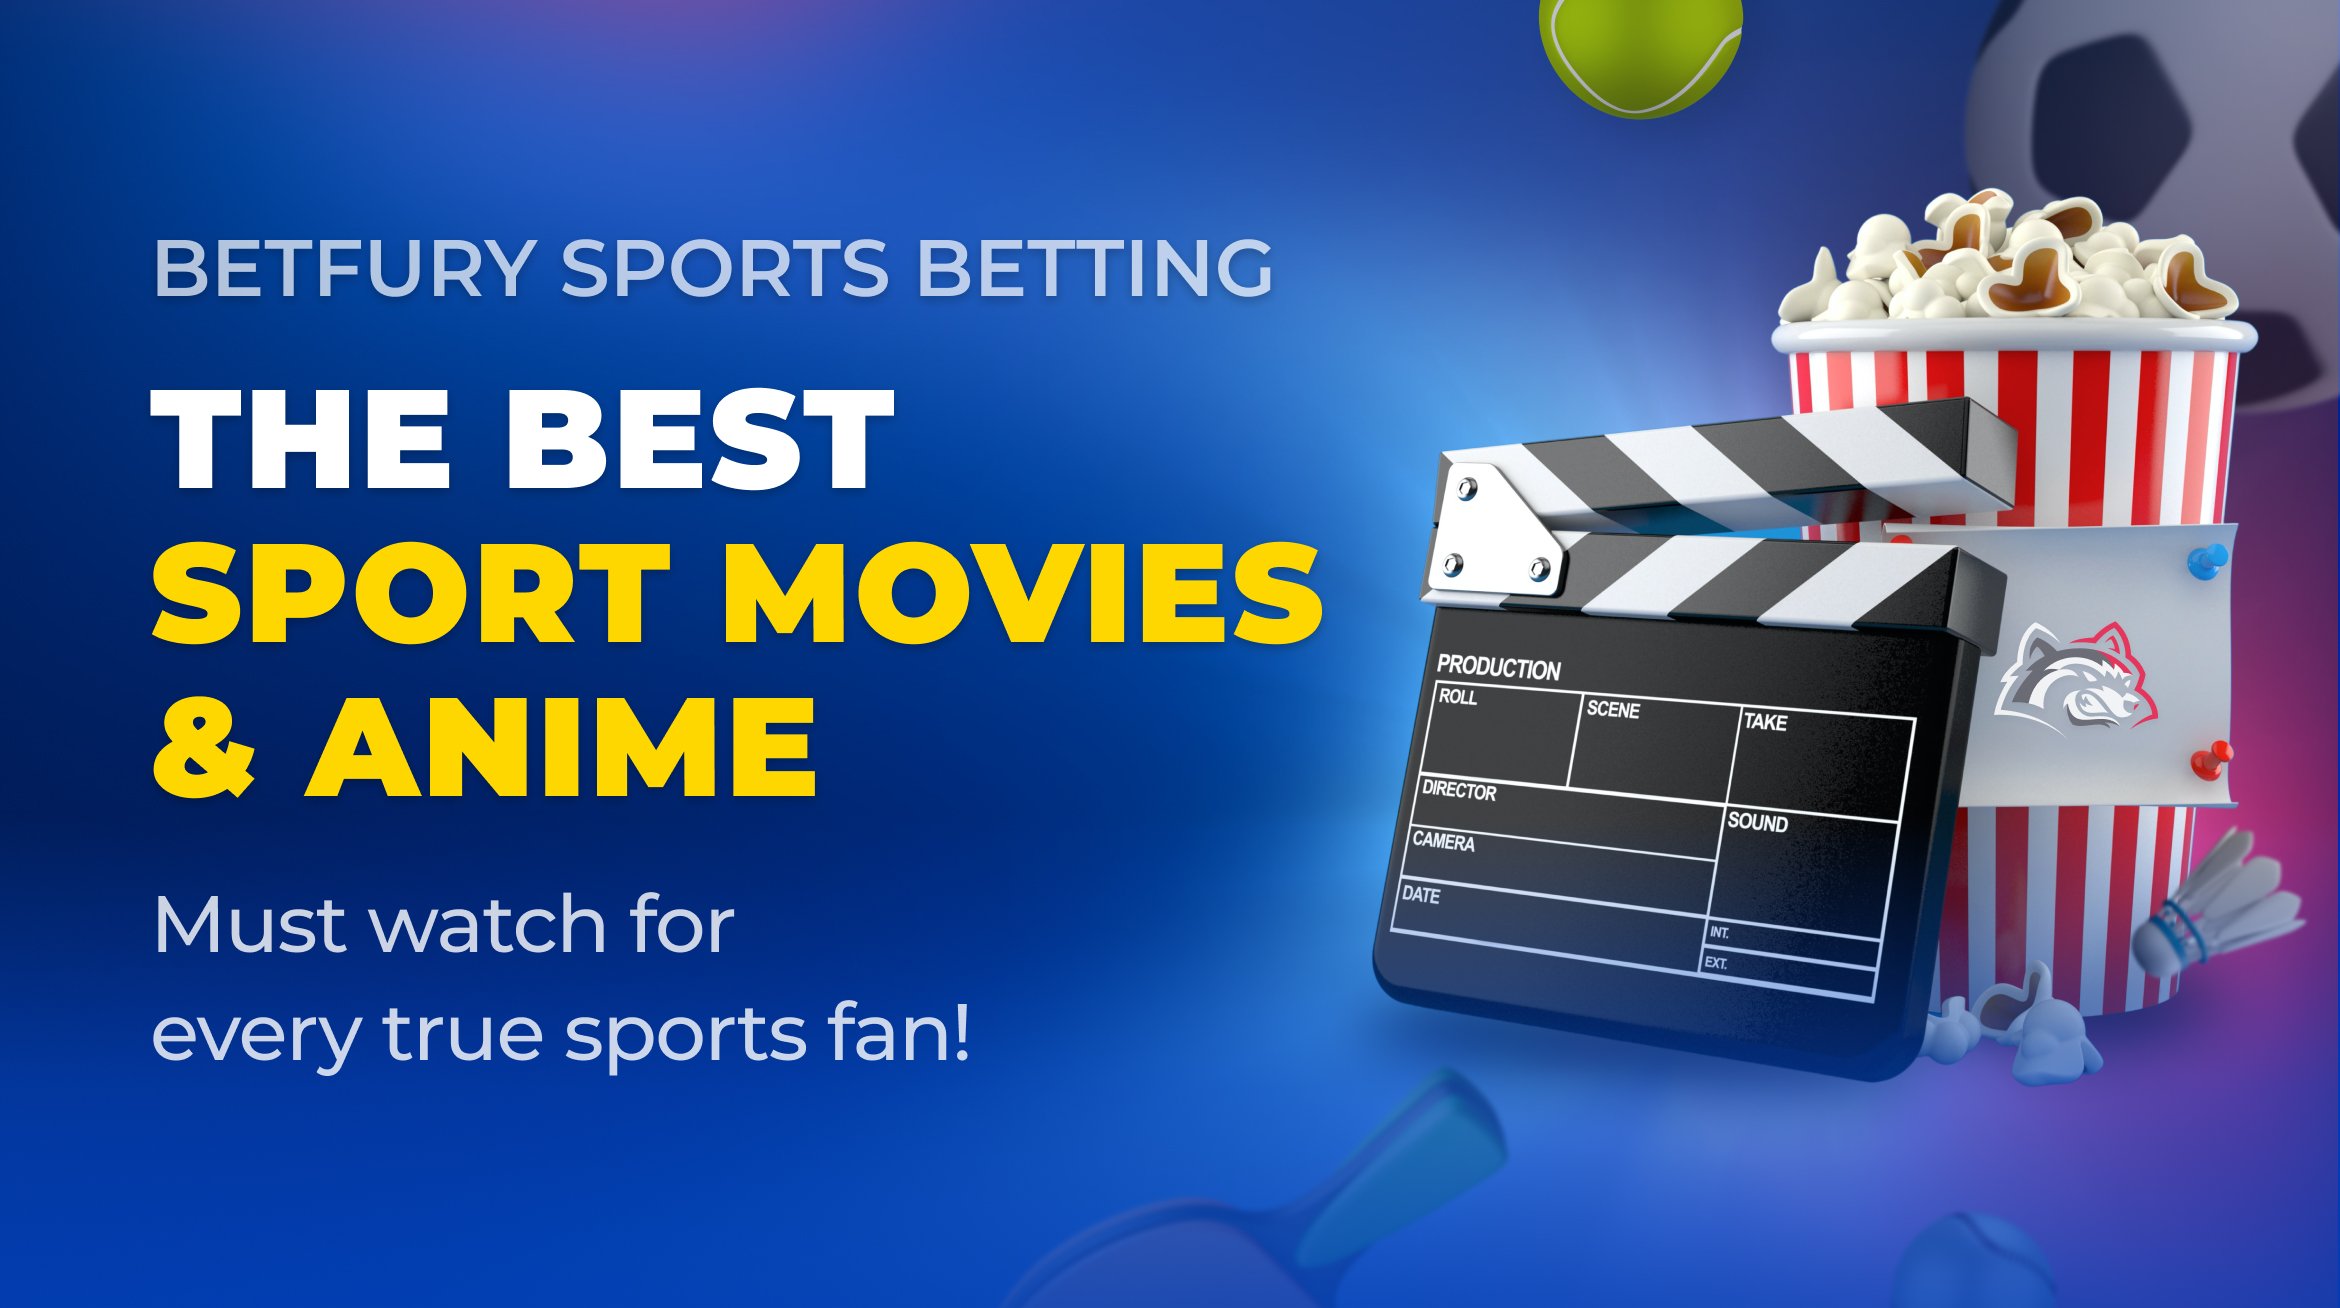 The Best Sports Movies & Anime by BetFury